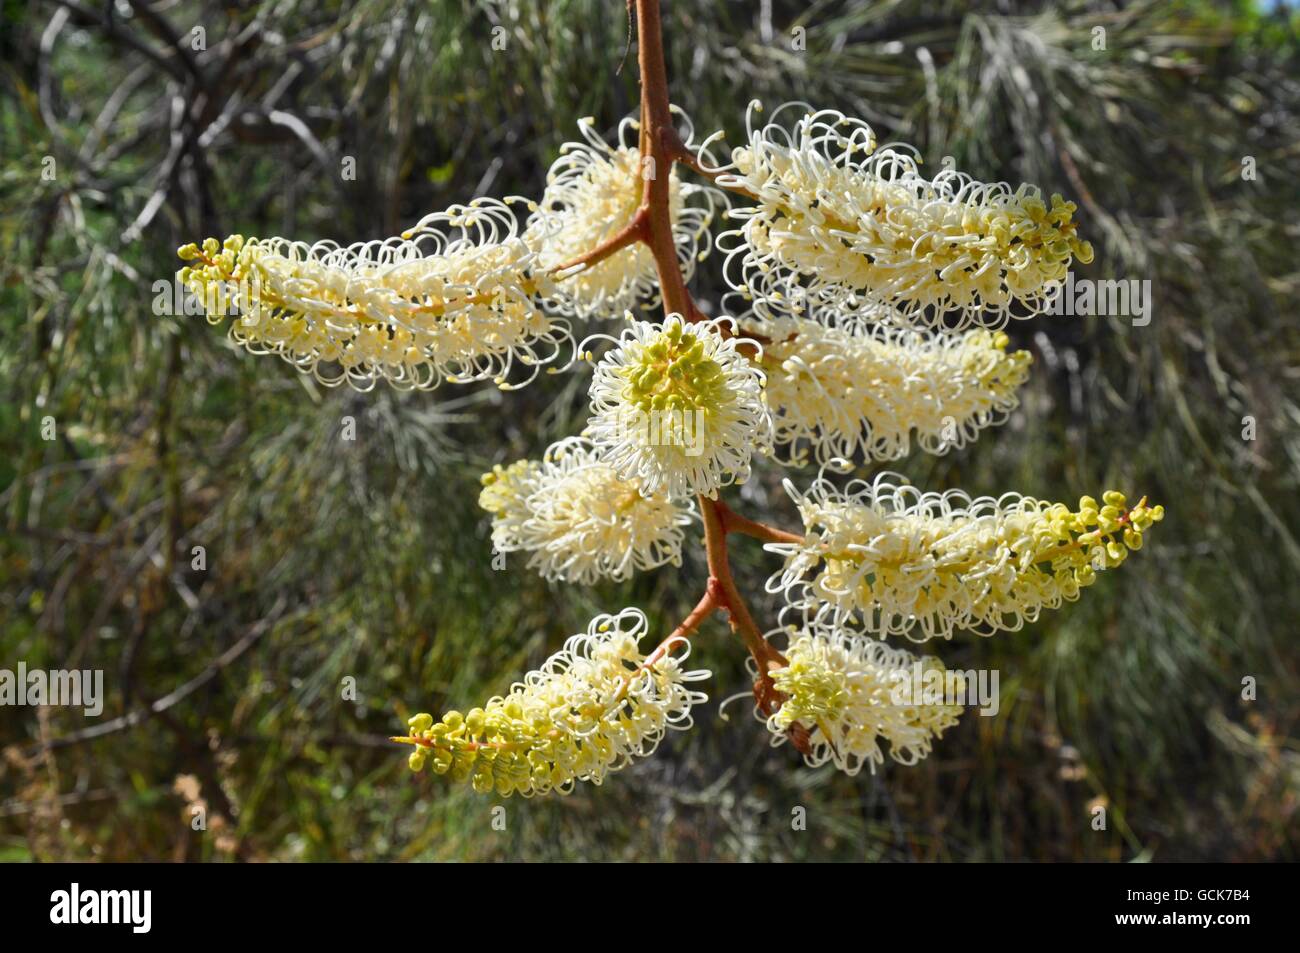 Hanging creamy yellow and white wiry spider flower, Grevillia Moonlight, in outdoor nature setting in Western Australia. Stock Photo